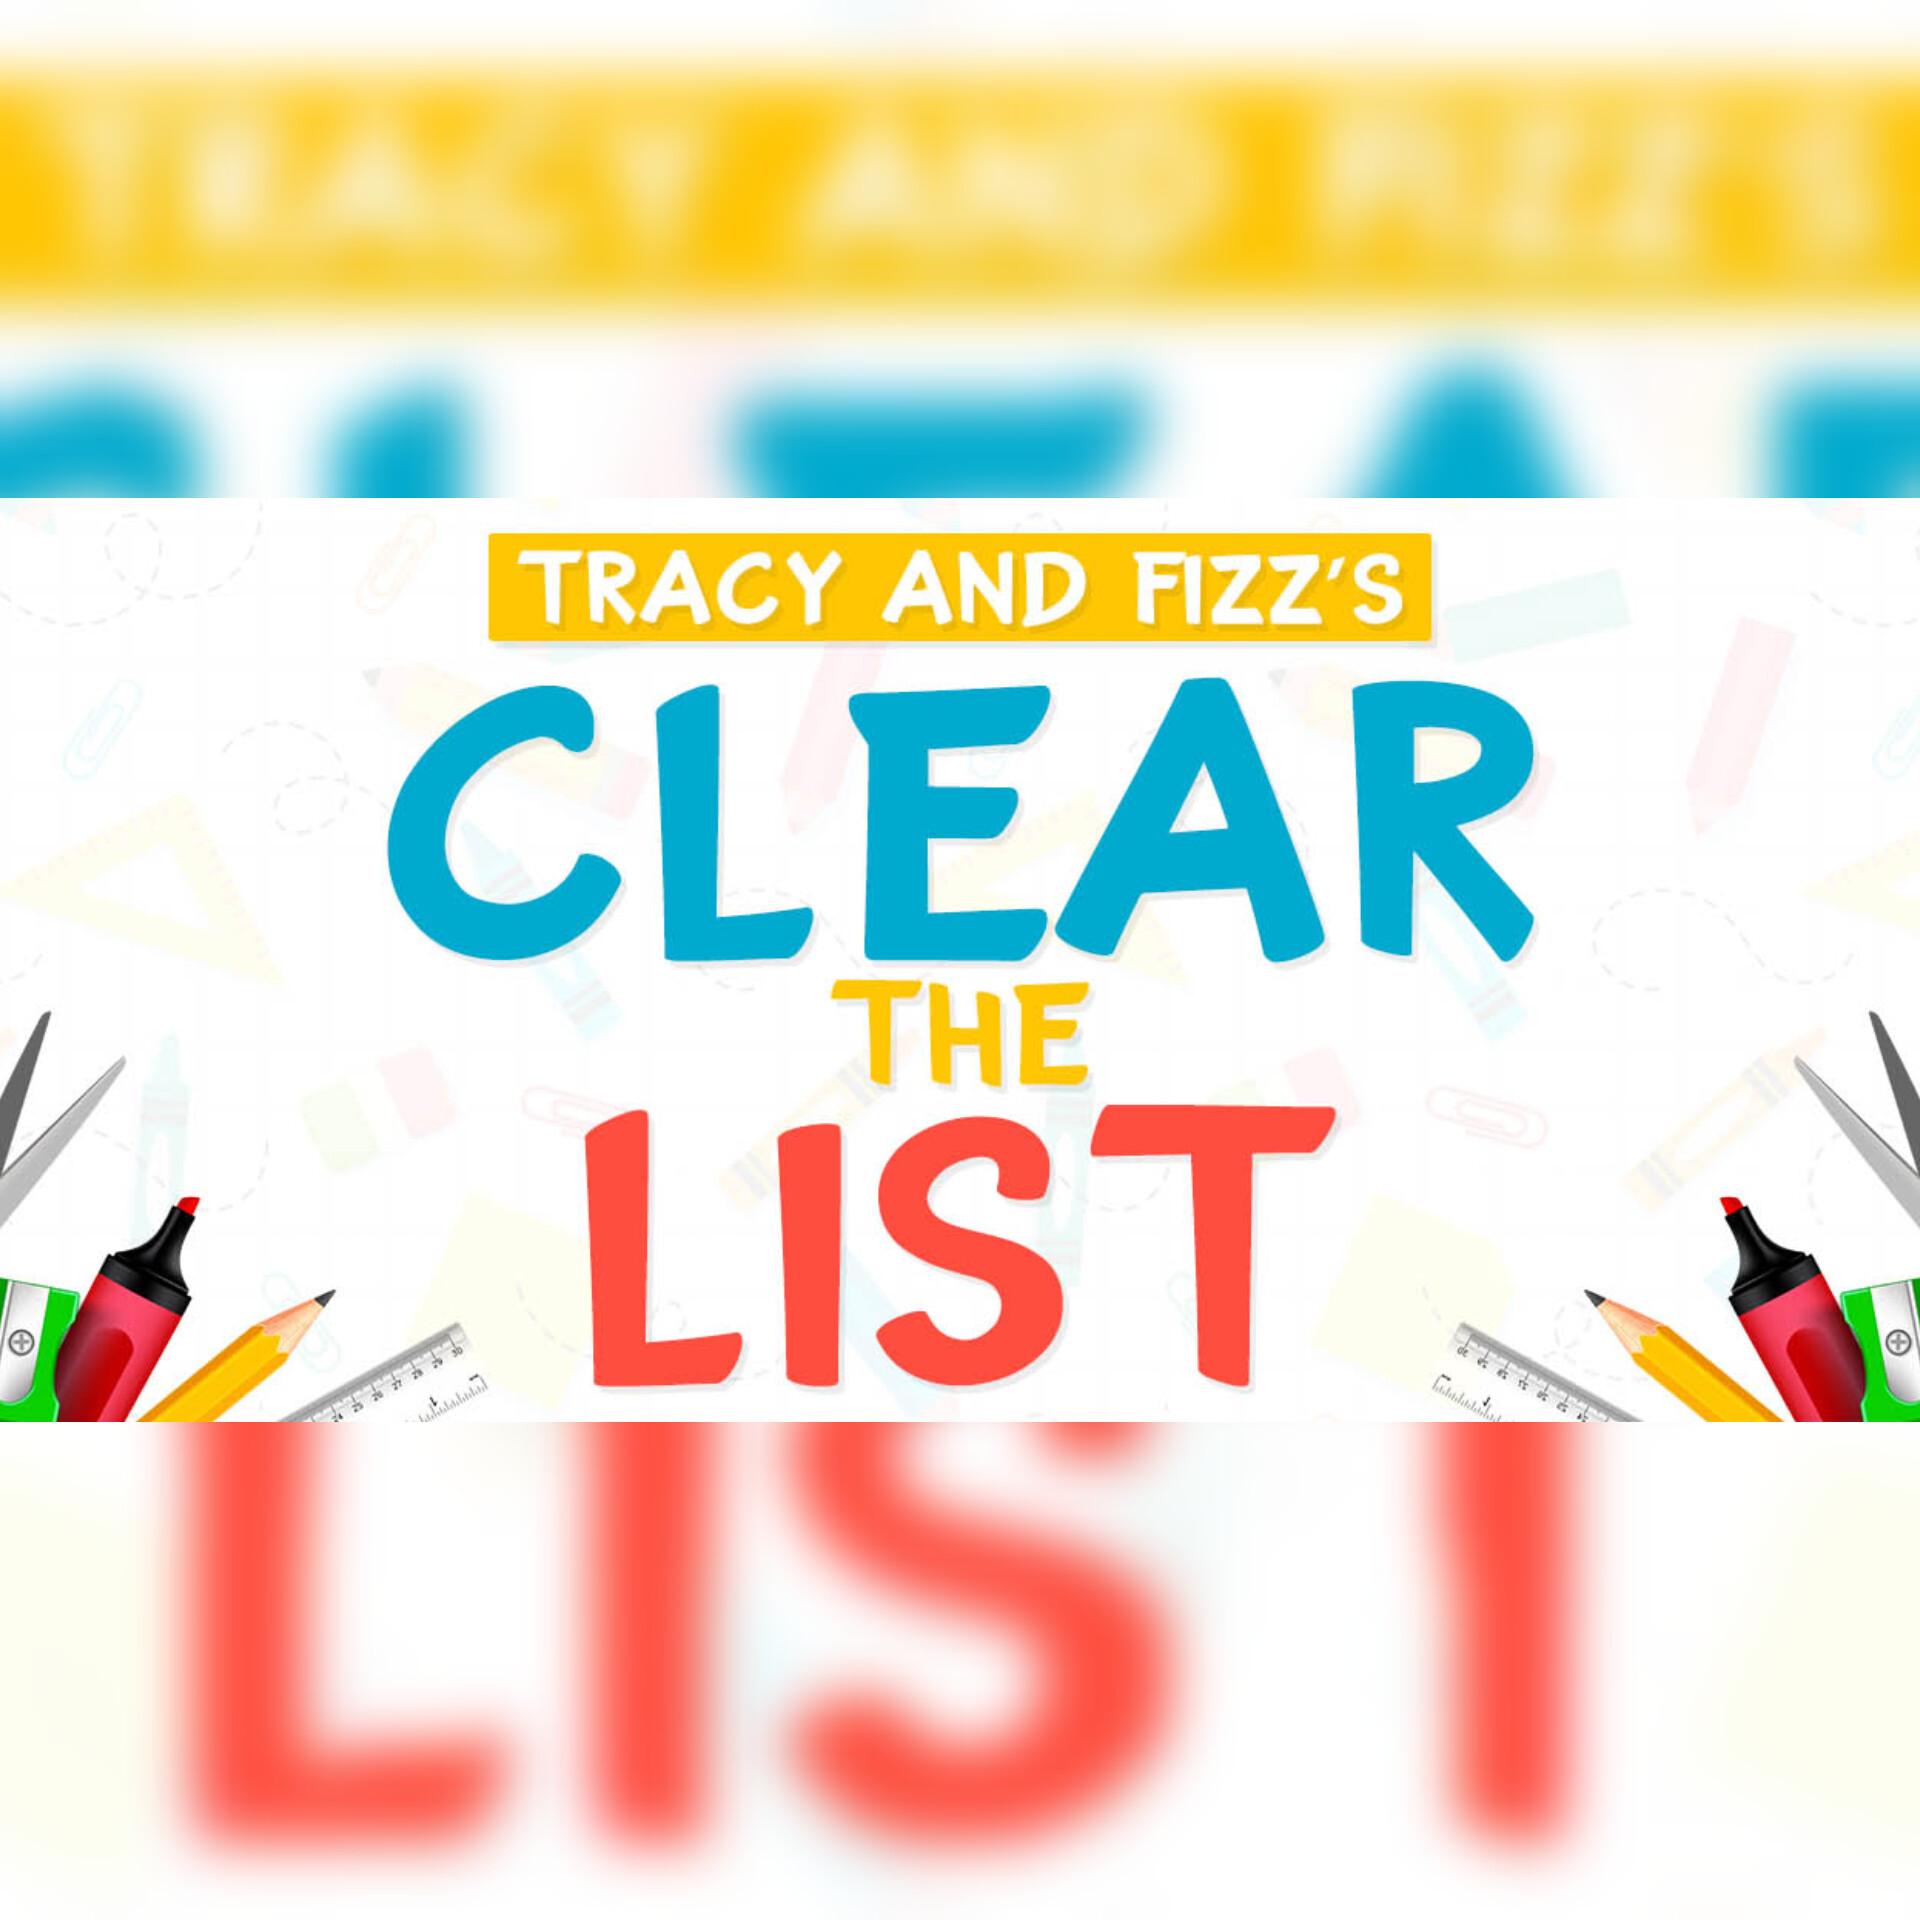 Mrs Lopez from Vista Peak Preparatory is in her 15th year of teaching starting at a new school after 7 years!  She could use a few items to help set her classroom up for success!  Help us Clear The List!